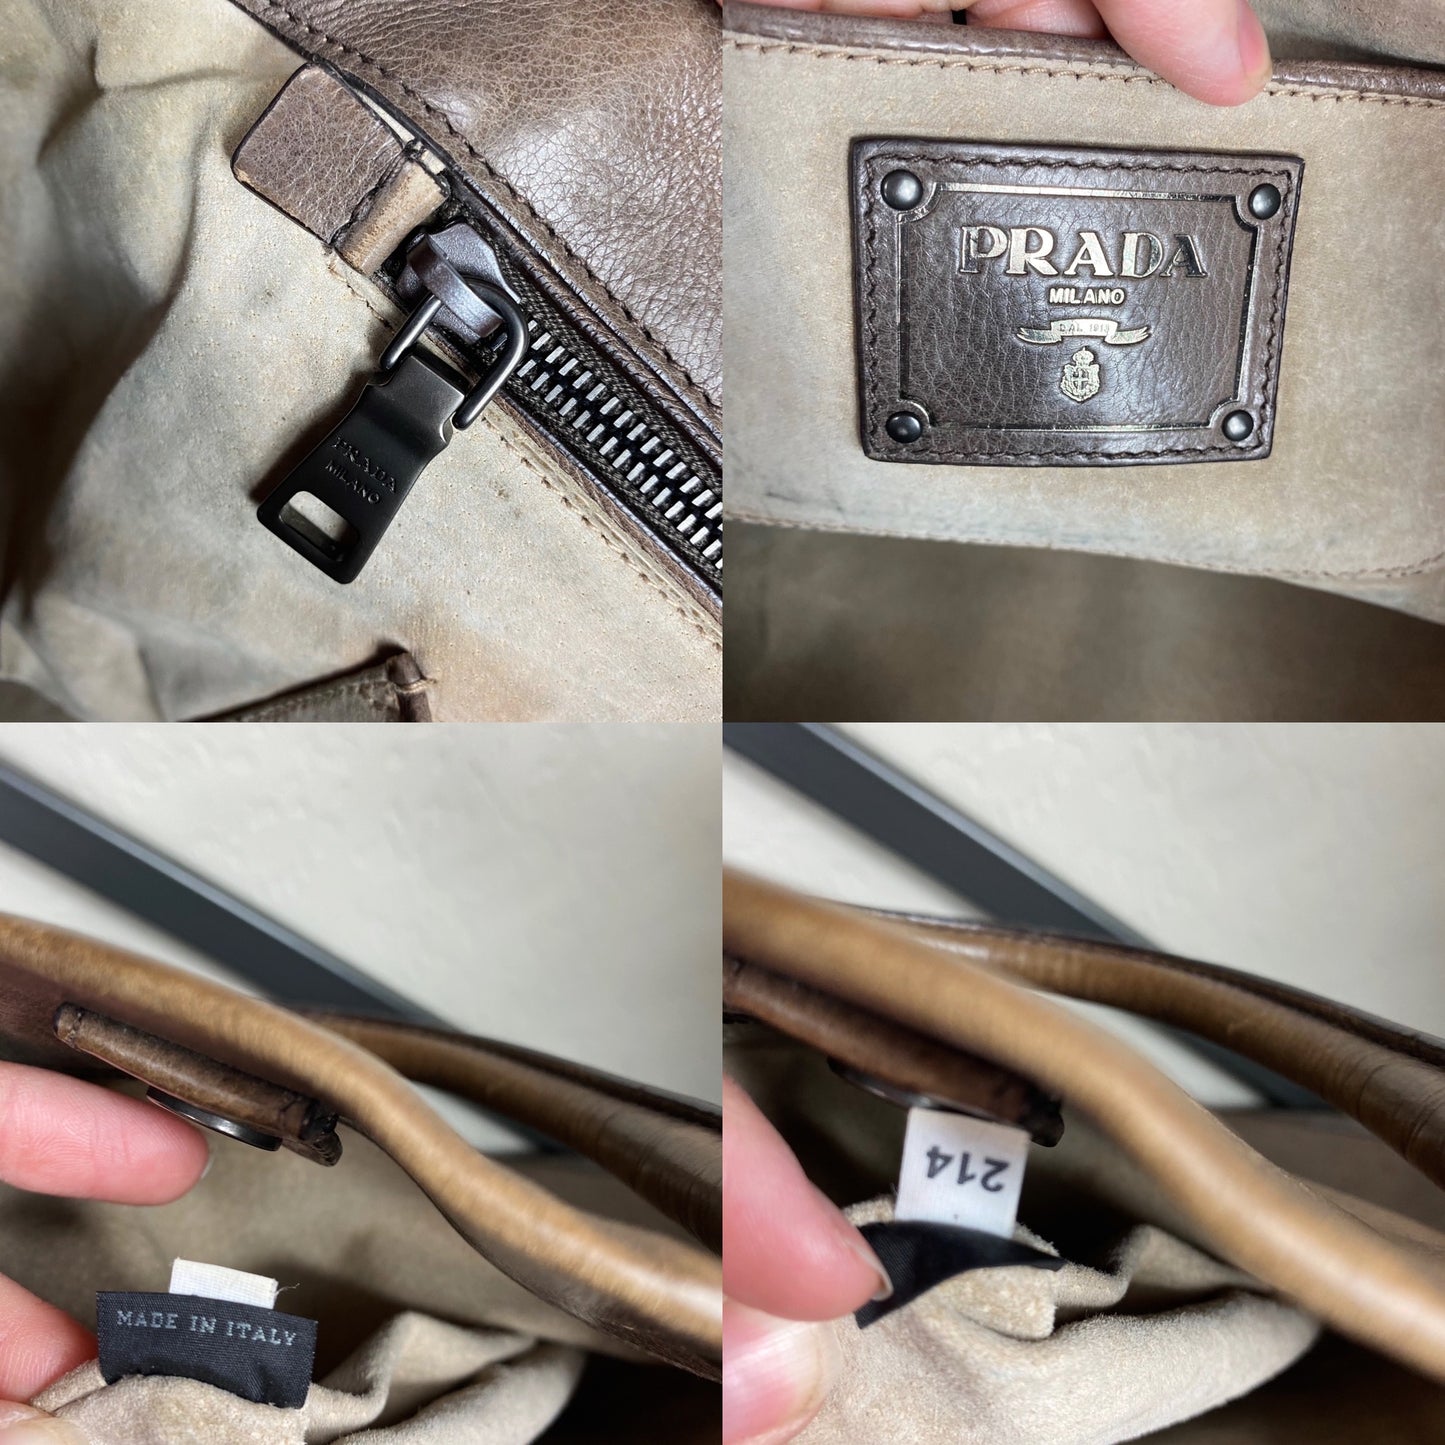 Prada Ombré Glace Leather Two Way Tote